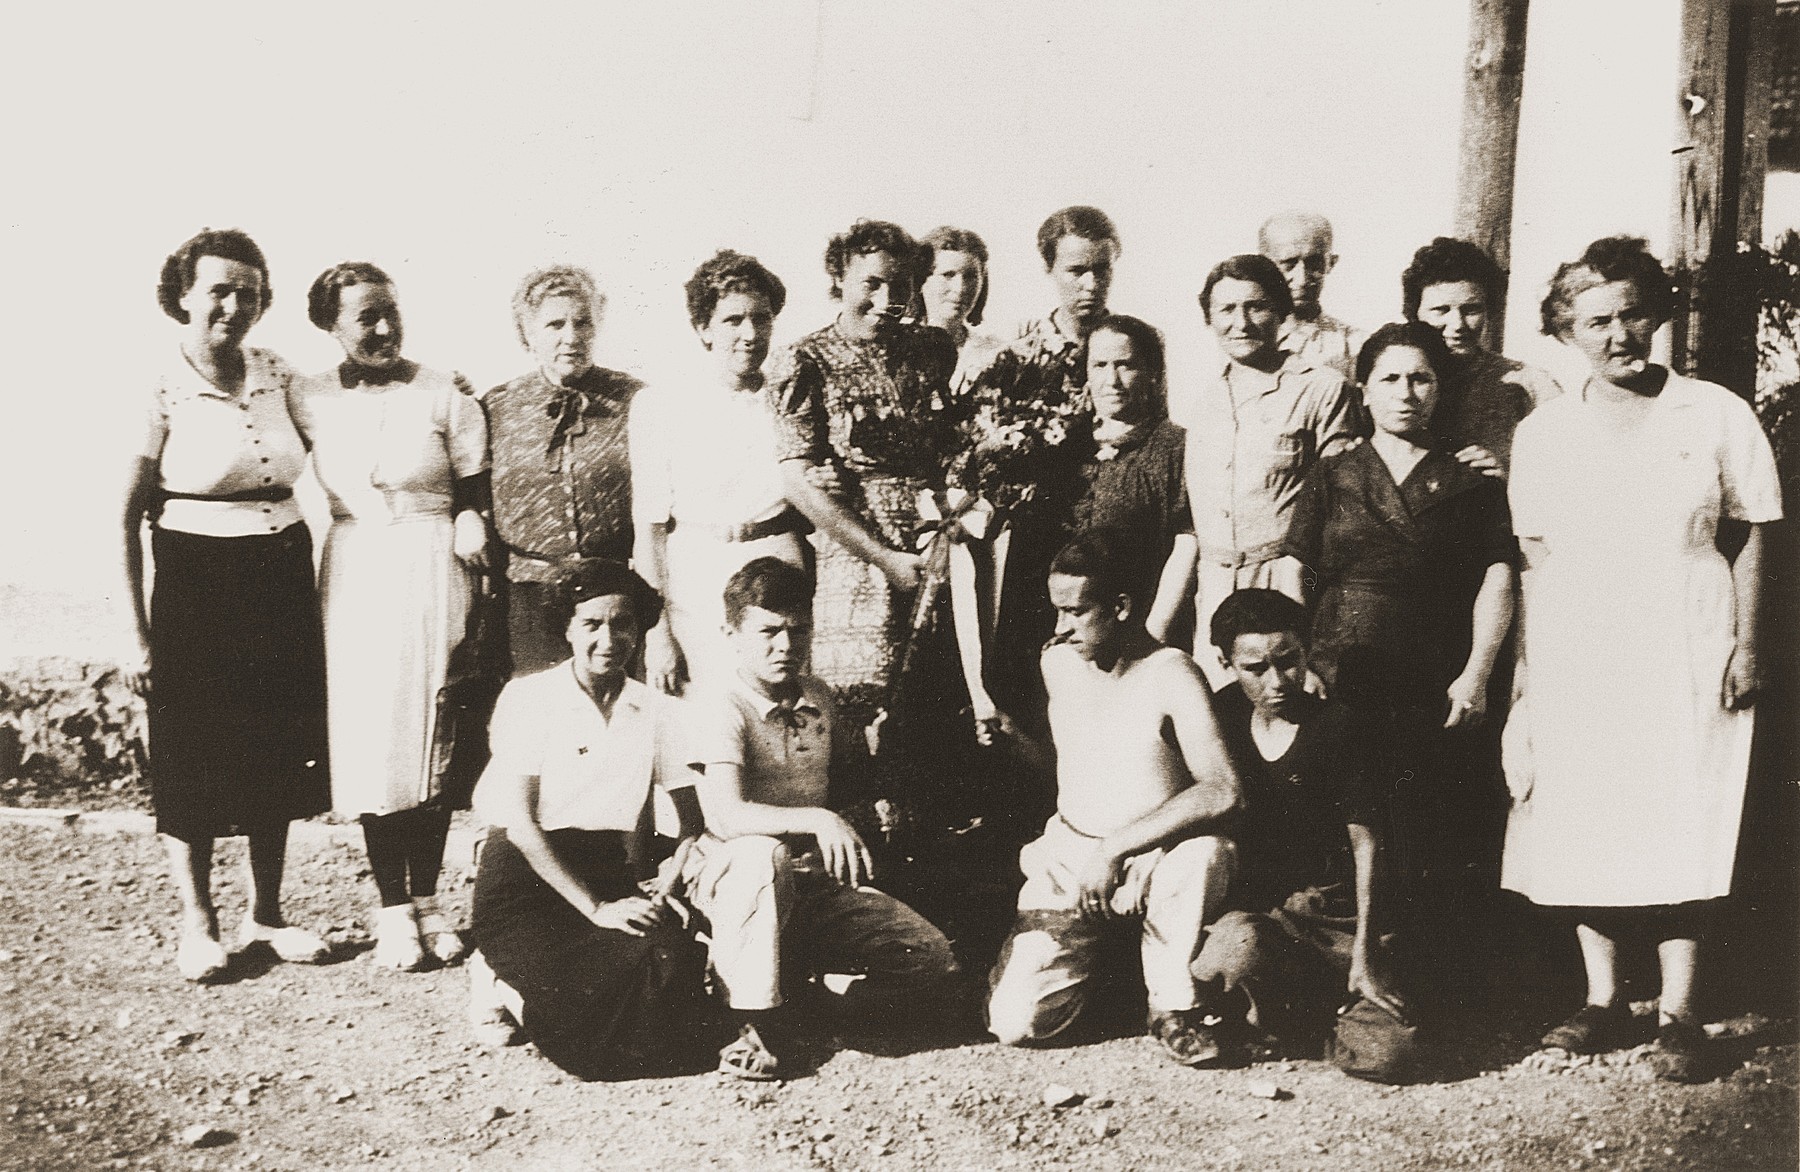 Group portrait of Spanish and Jewish assistants to the Secours Suisse relief team.  They gathered to mark the departure of Elsa Ruth.